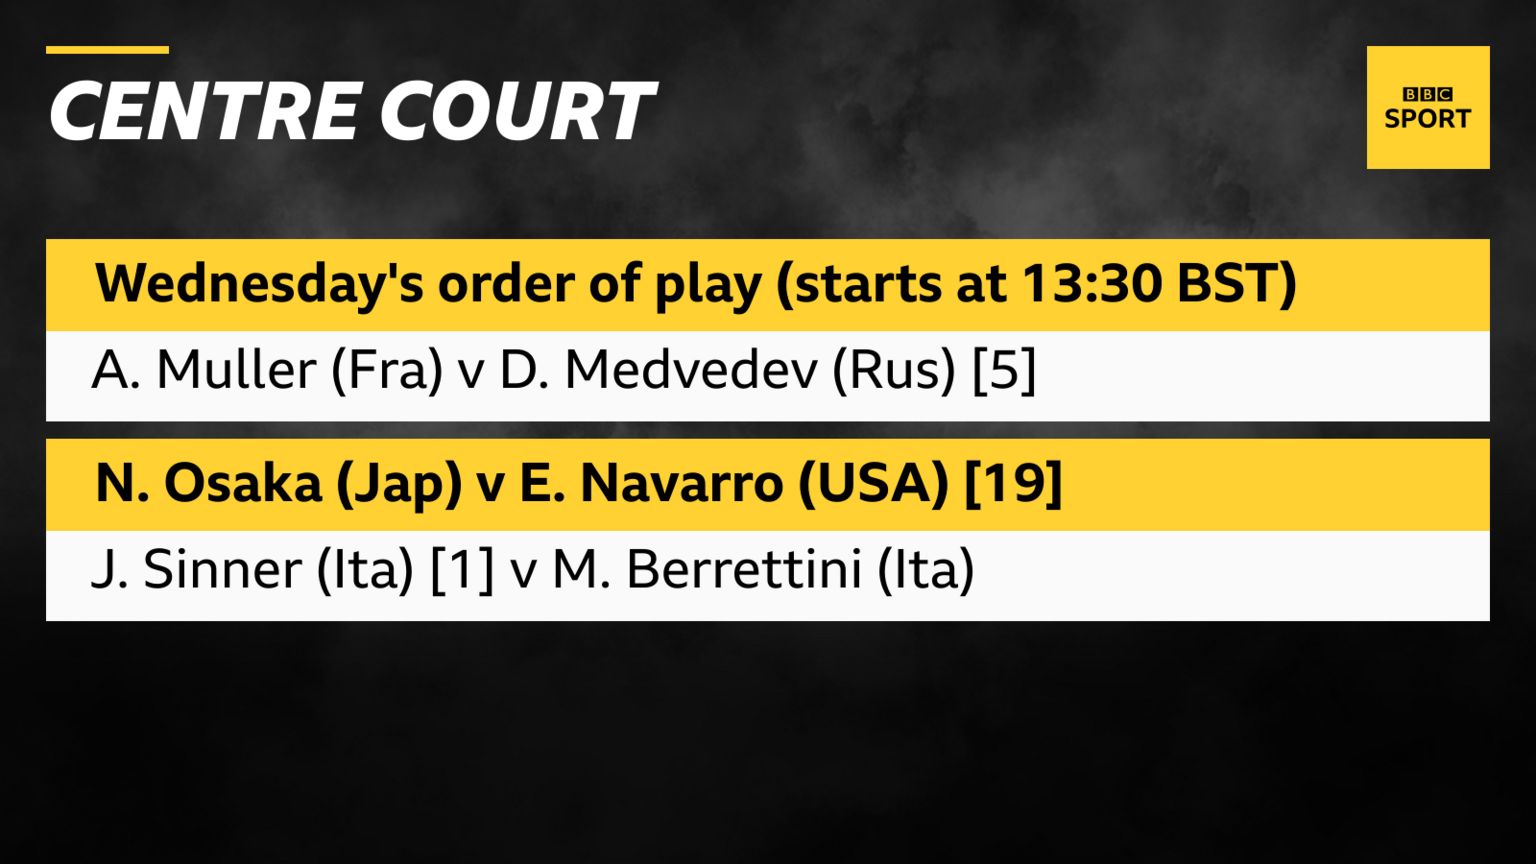 Wednesday's order of play on Centre Court at Wimbledon